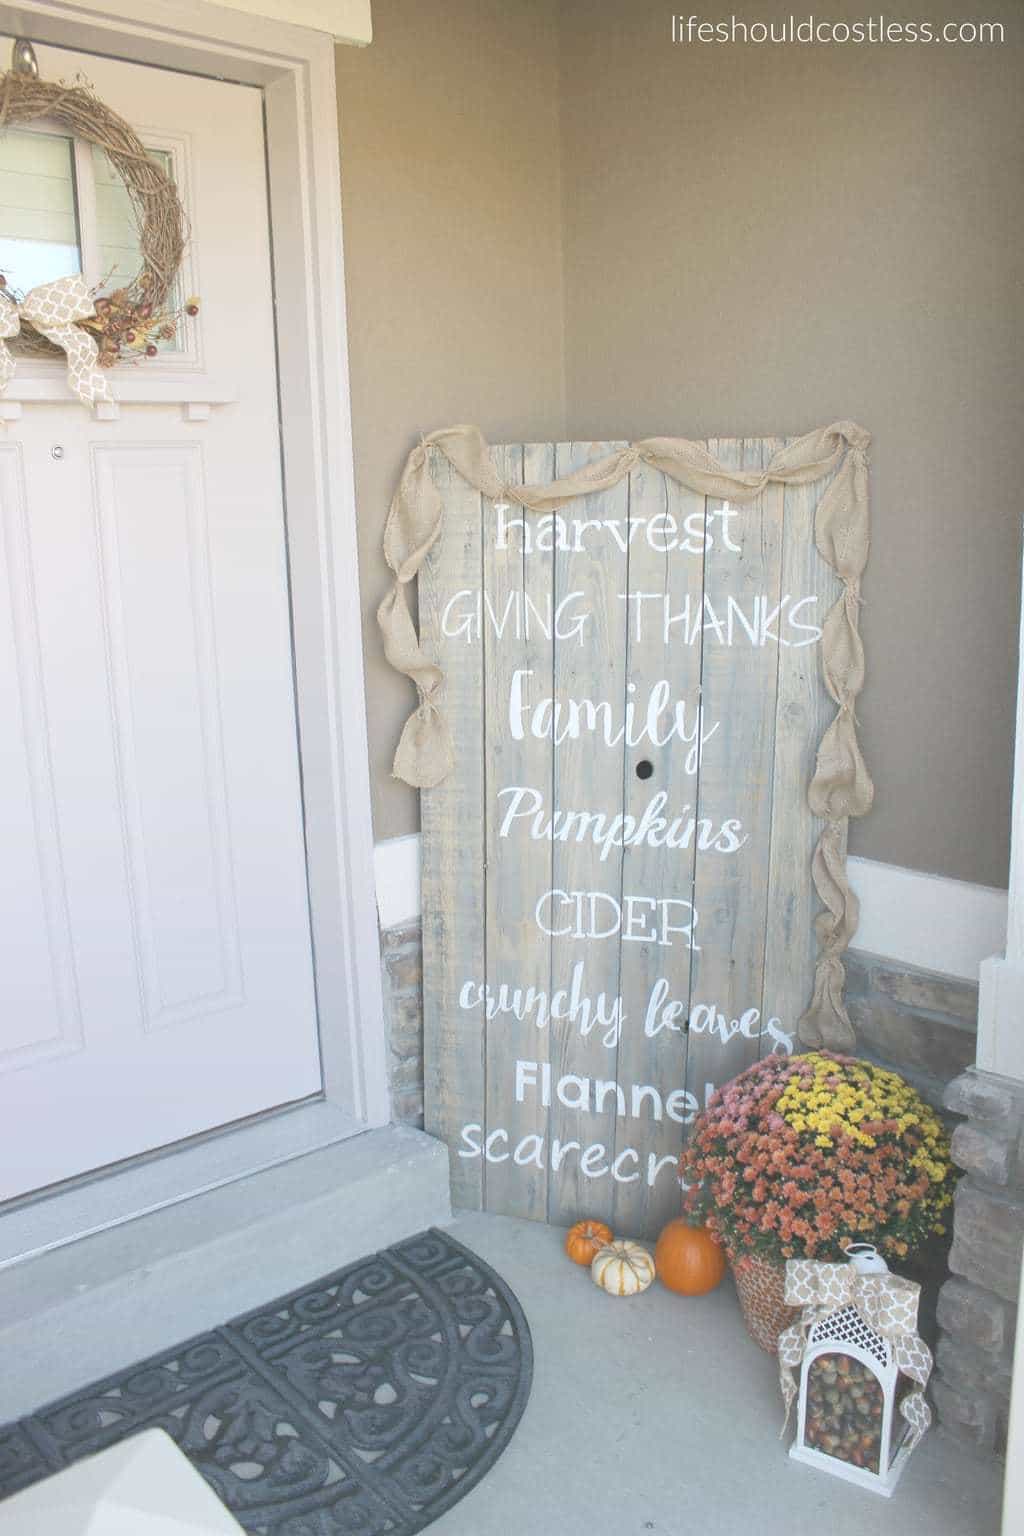 Rustic fall porch decor reveal. See this post and many more popular decor pins at lifeshouldcostless.com.